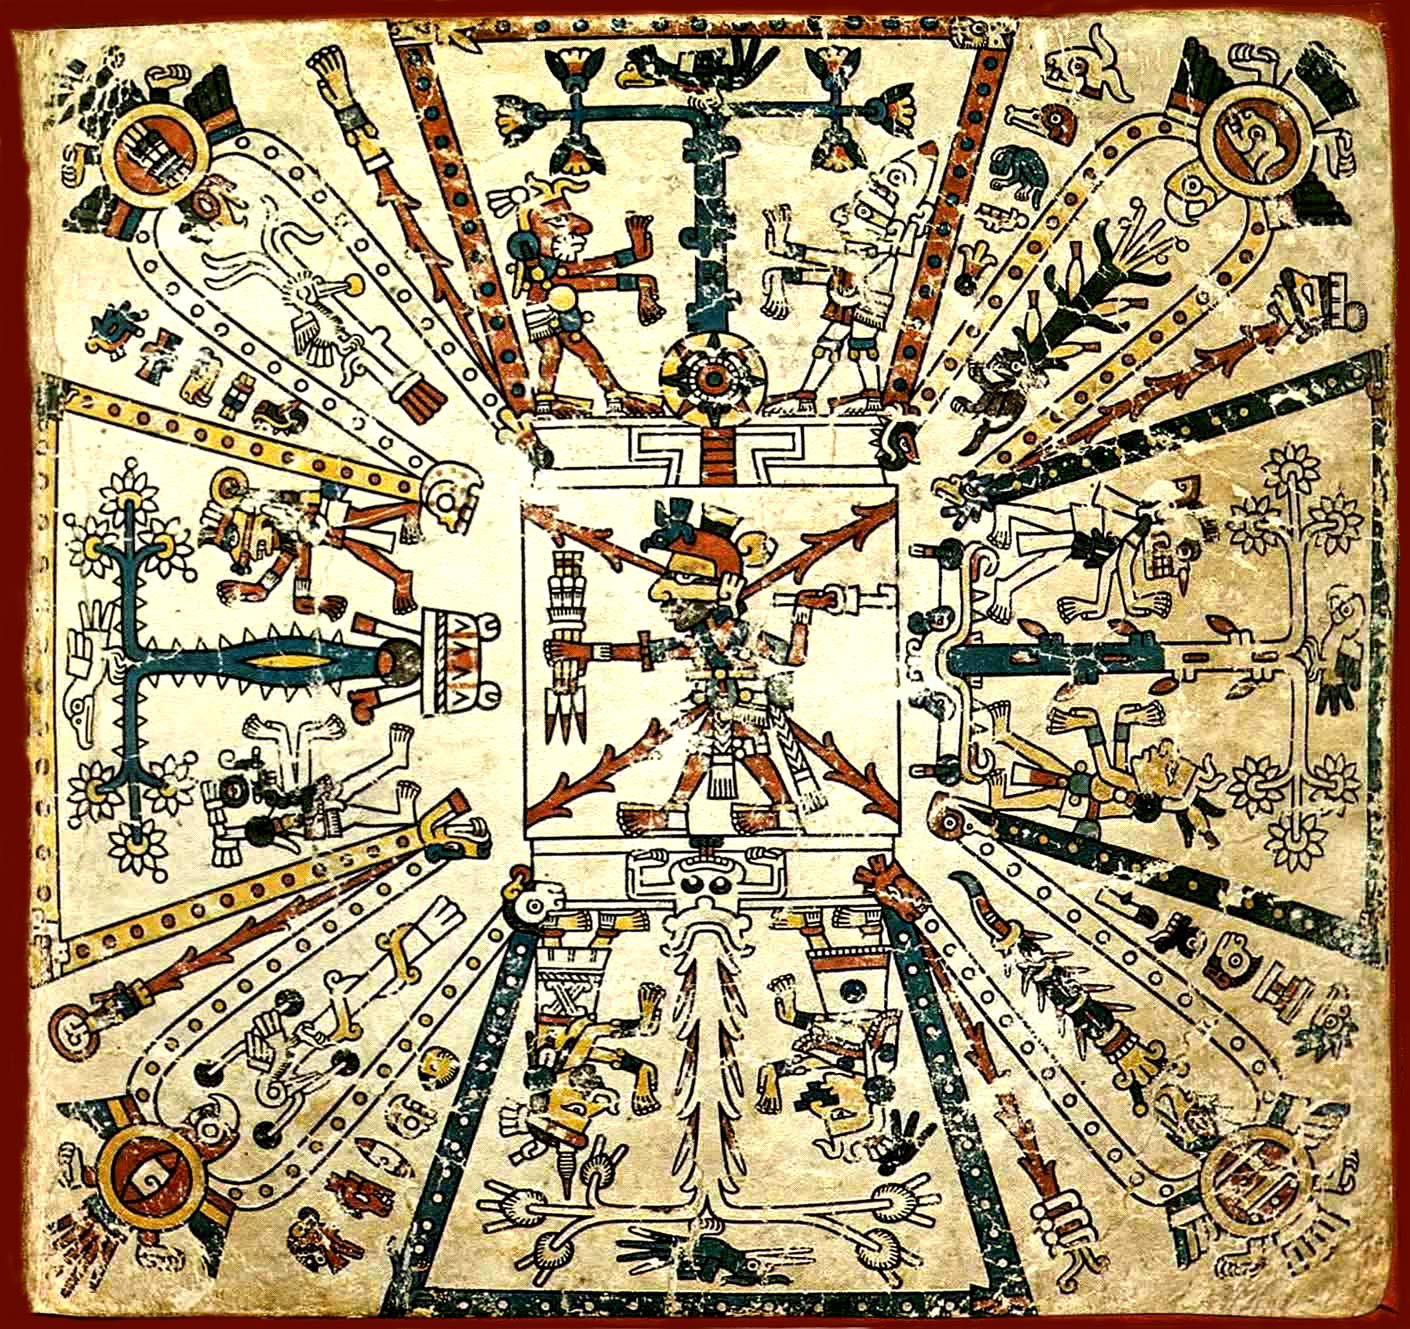 Codex with person image in center and intricate drawings surrounding